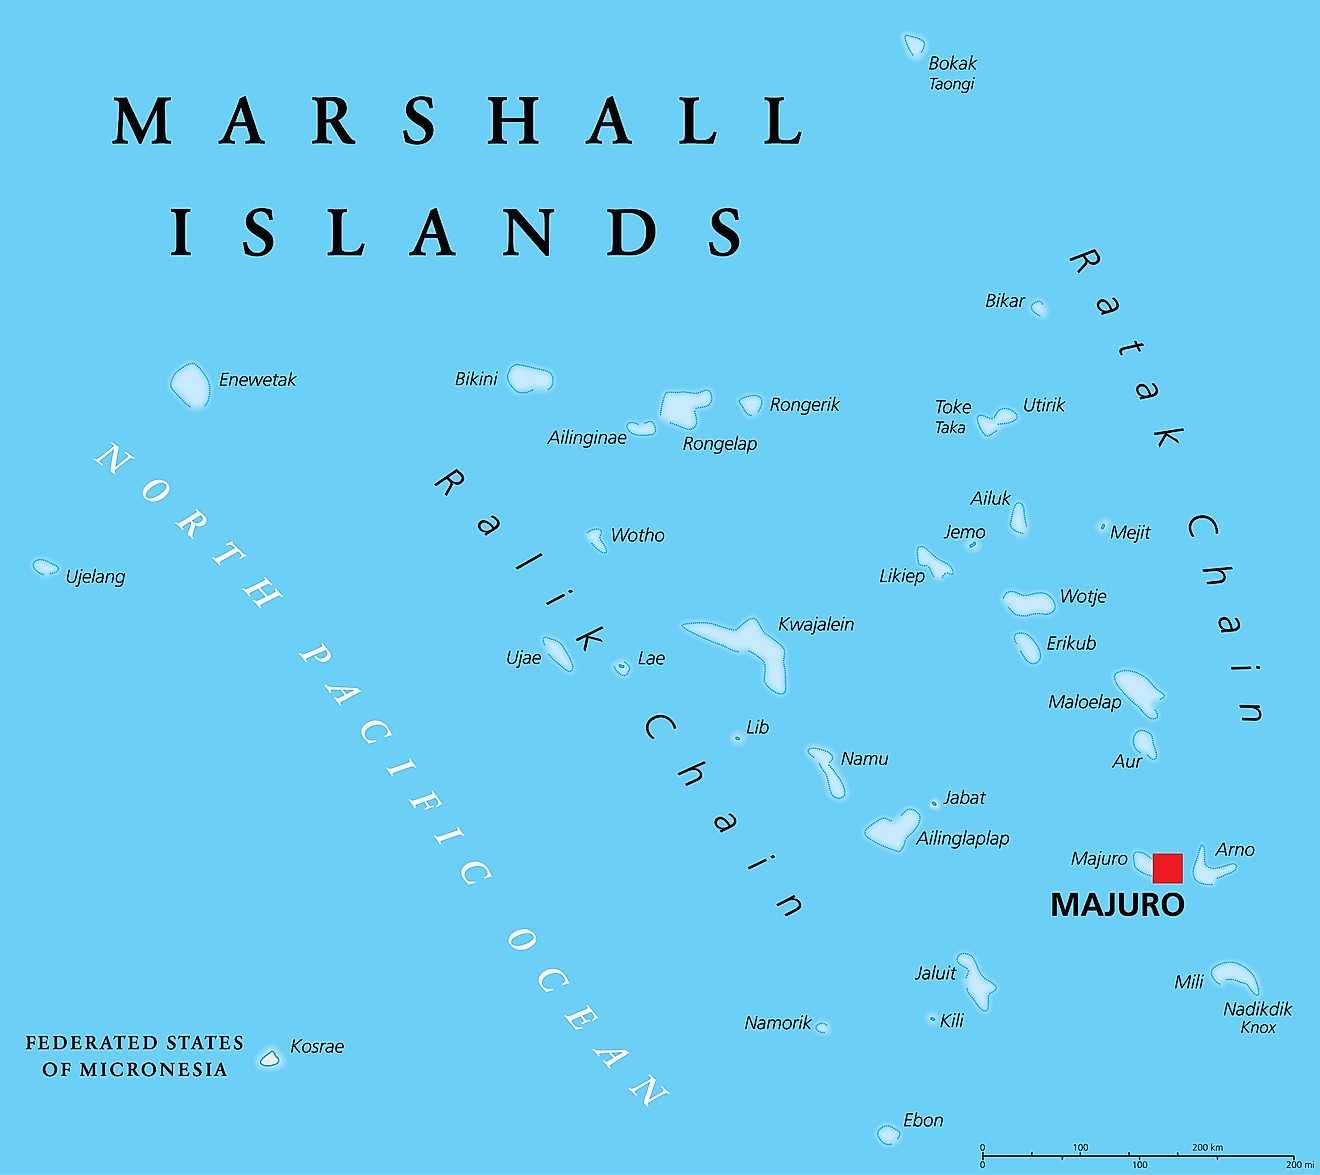 Political Map of Marshall Islands showing the capital Majuro.